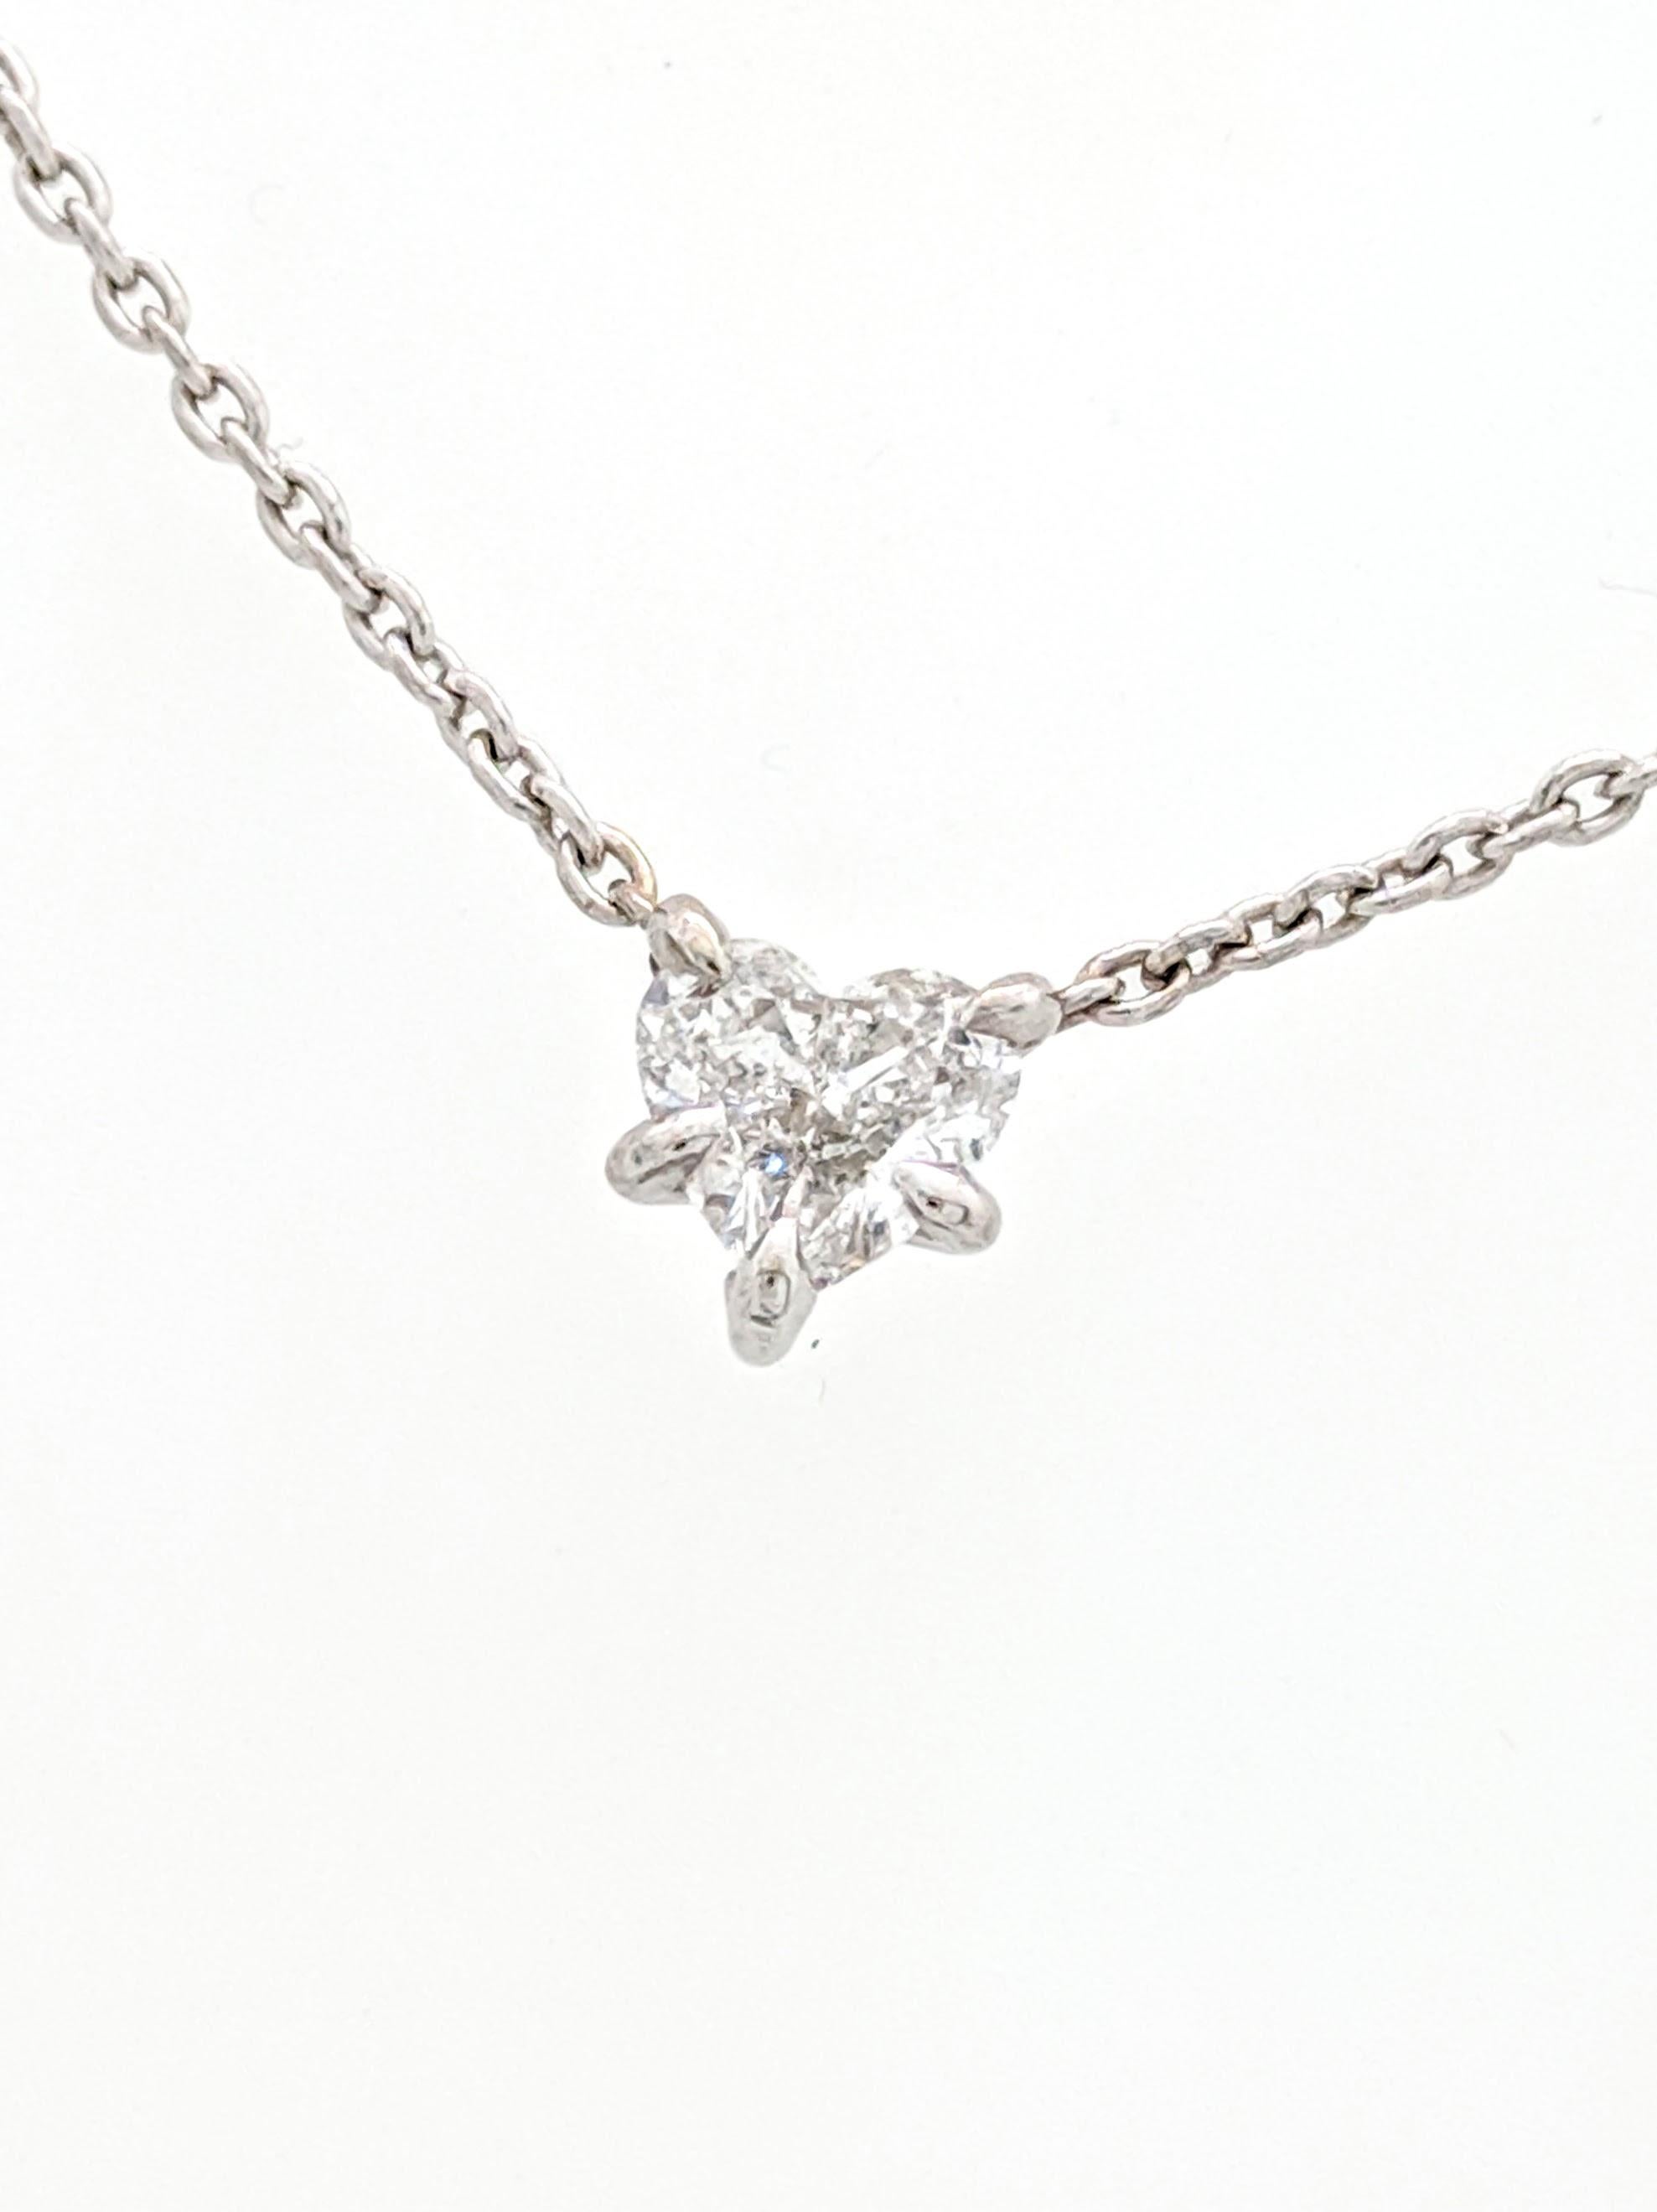 .63 Carat Heart Shaped Diamond Pendant Necklace SI1/H In New Condition For Sale In Gainesville, FL